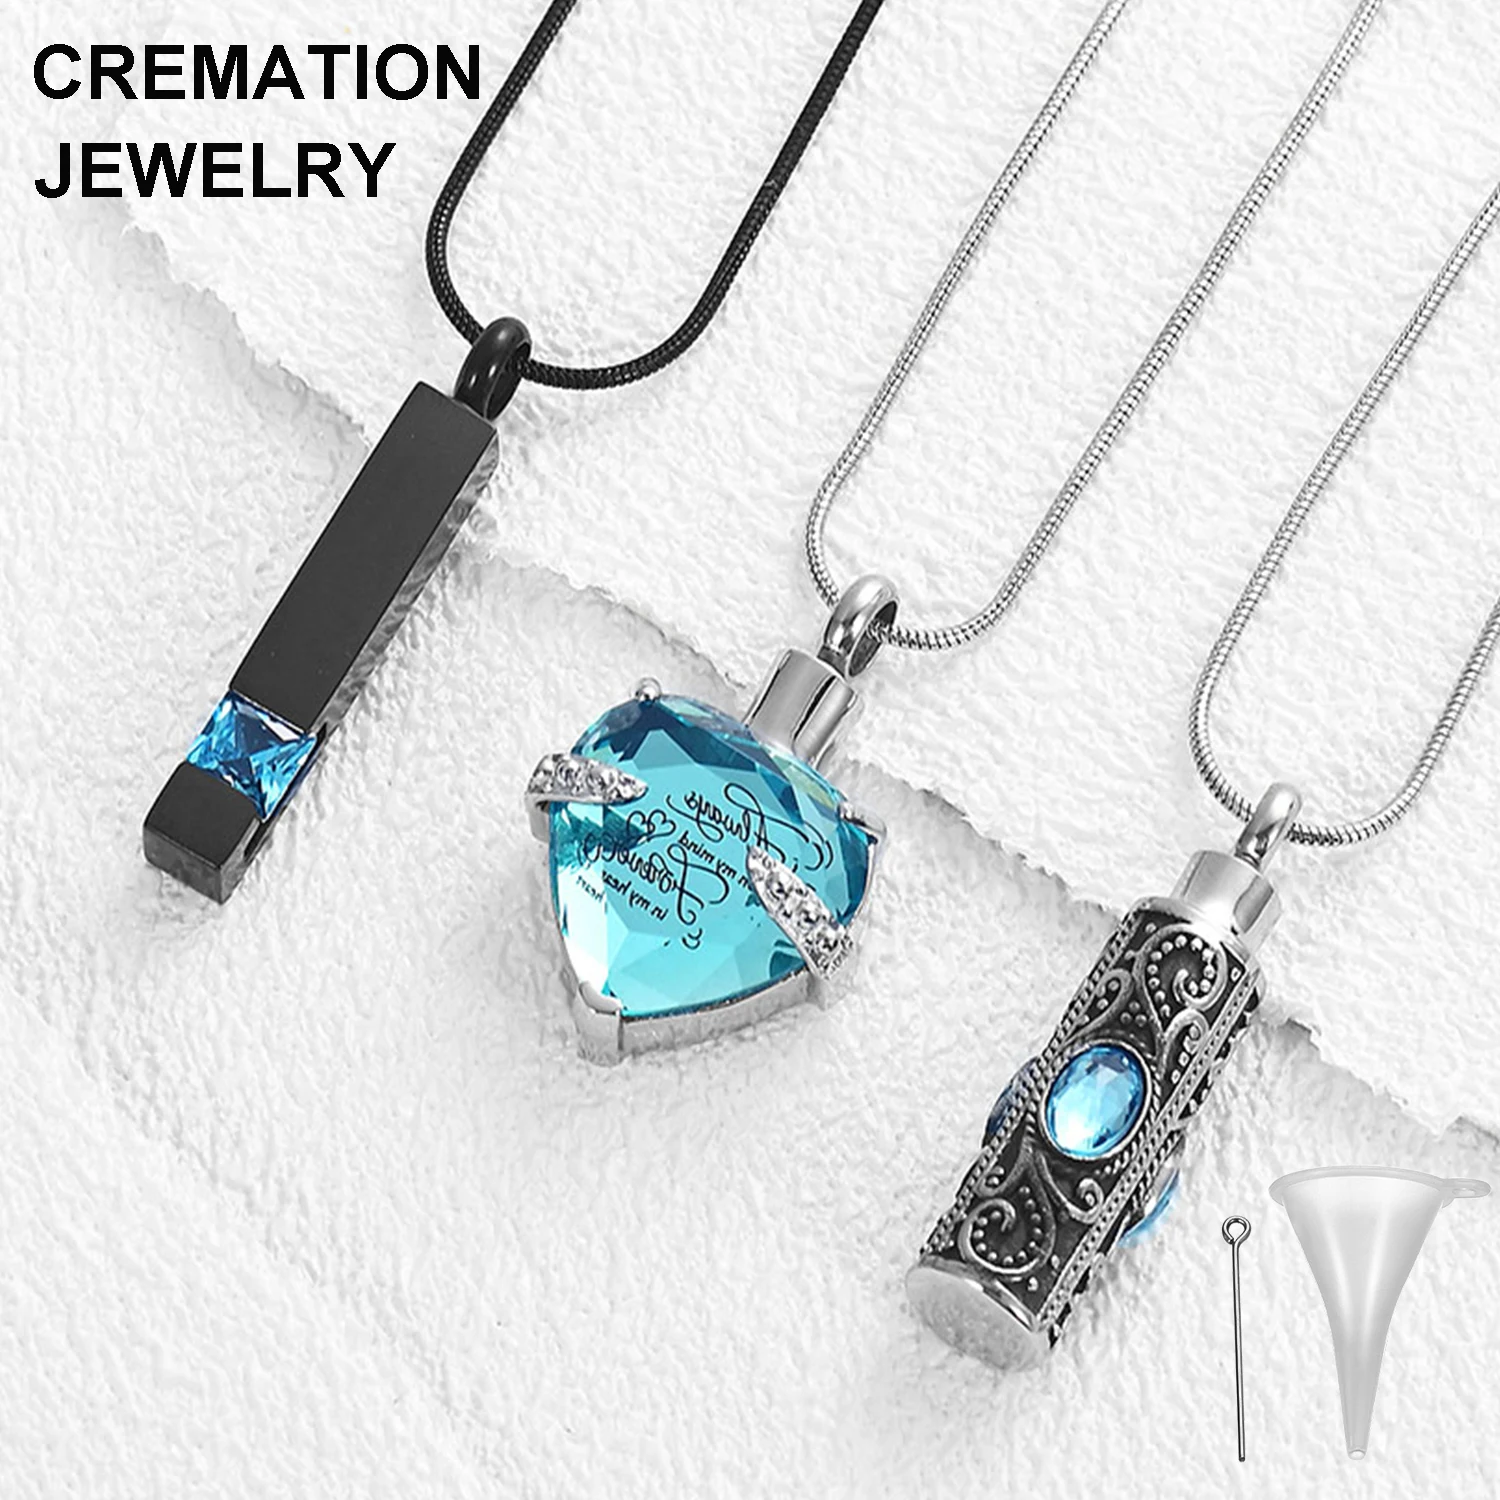 

Cremation Jewelry Crystal Heart with Inlaid Heart Shape Pendant Necklace Stainless Steel Women Girl For Ashes Keepsake Memorial